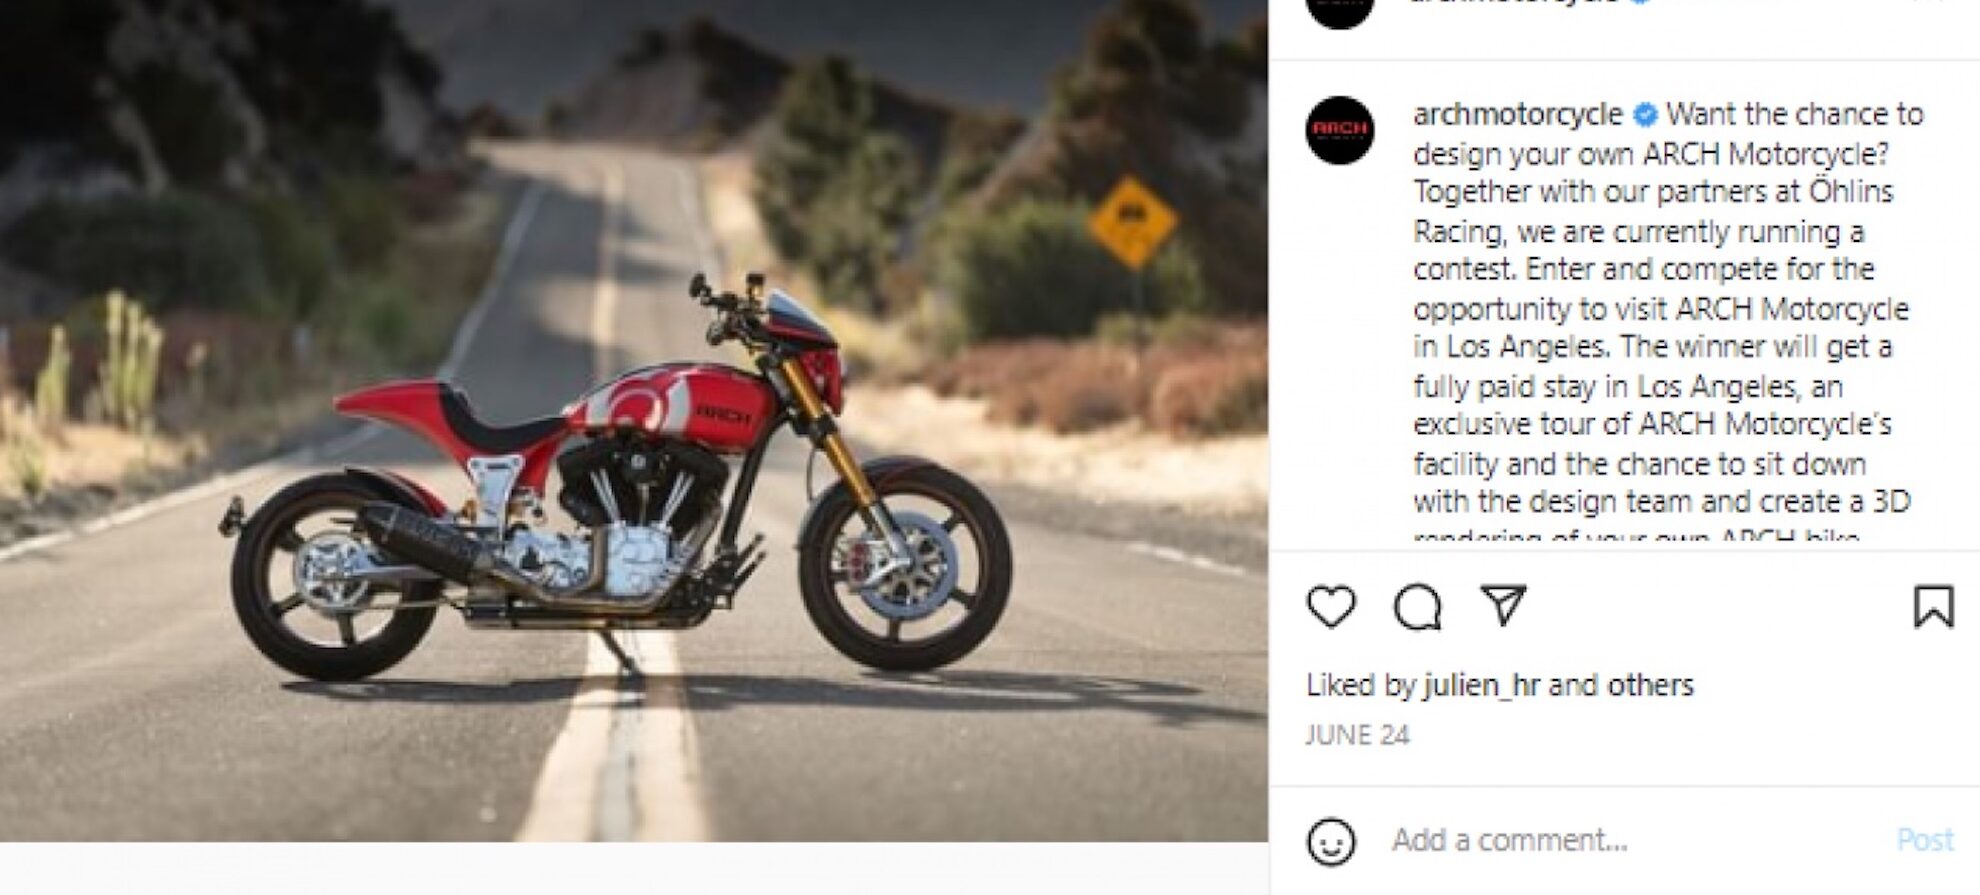 A view of ARCH Motorcycles in the bid to enter SRCH's and Ohlins's Social Contest. Media sourced from motorcycle.com